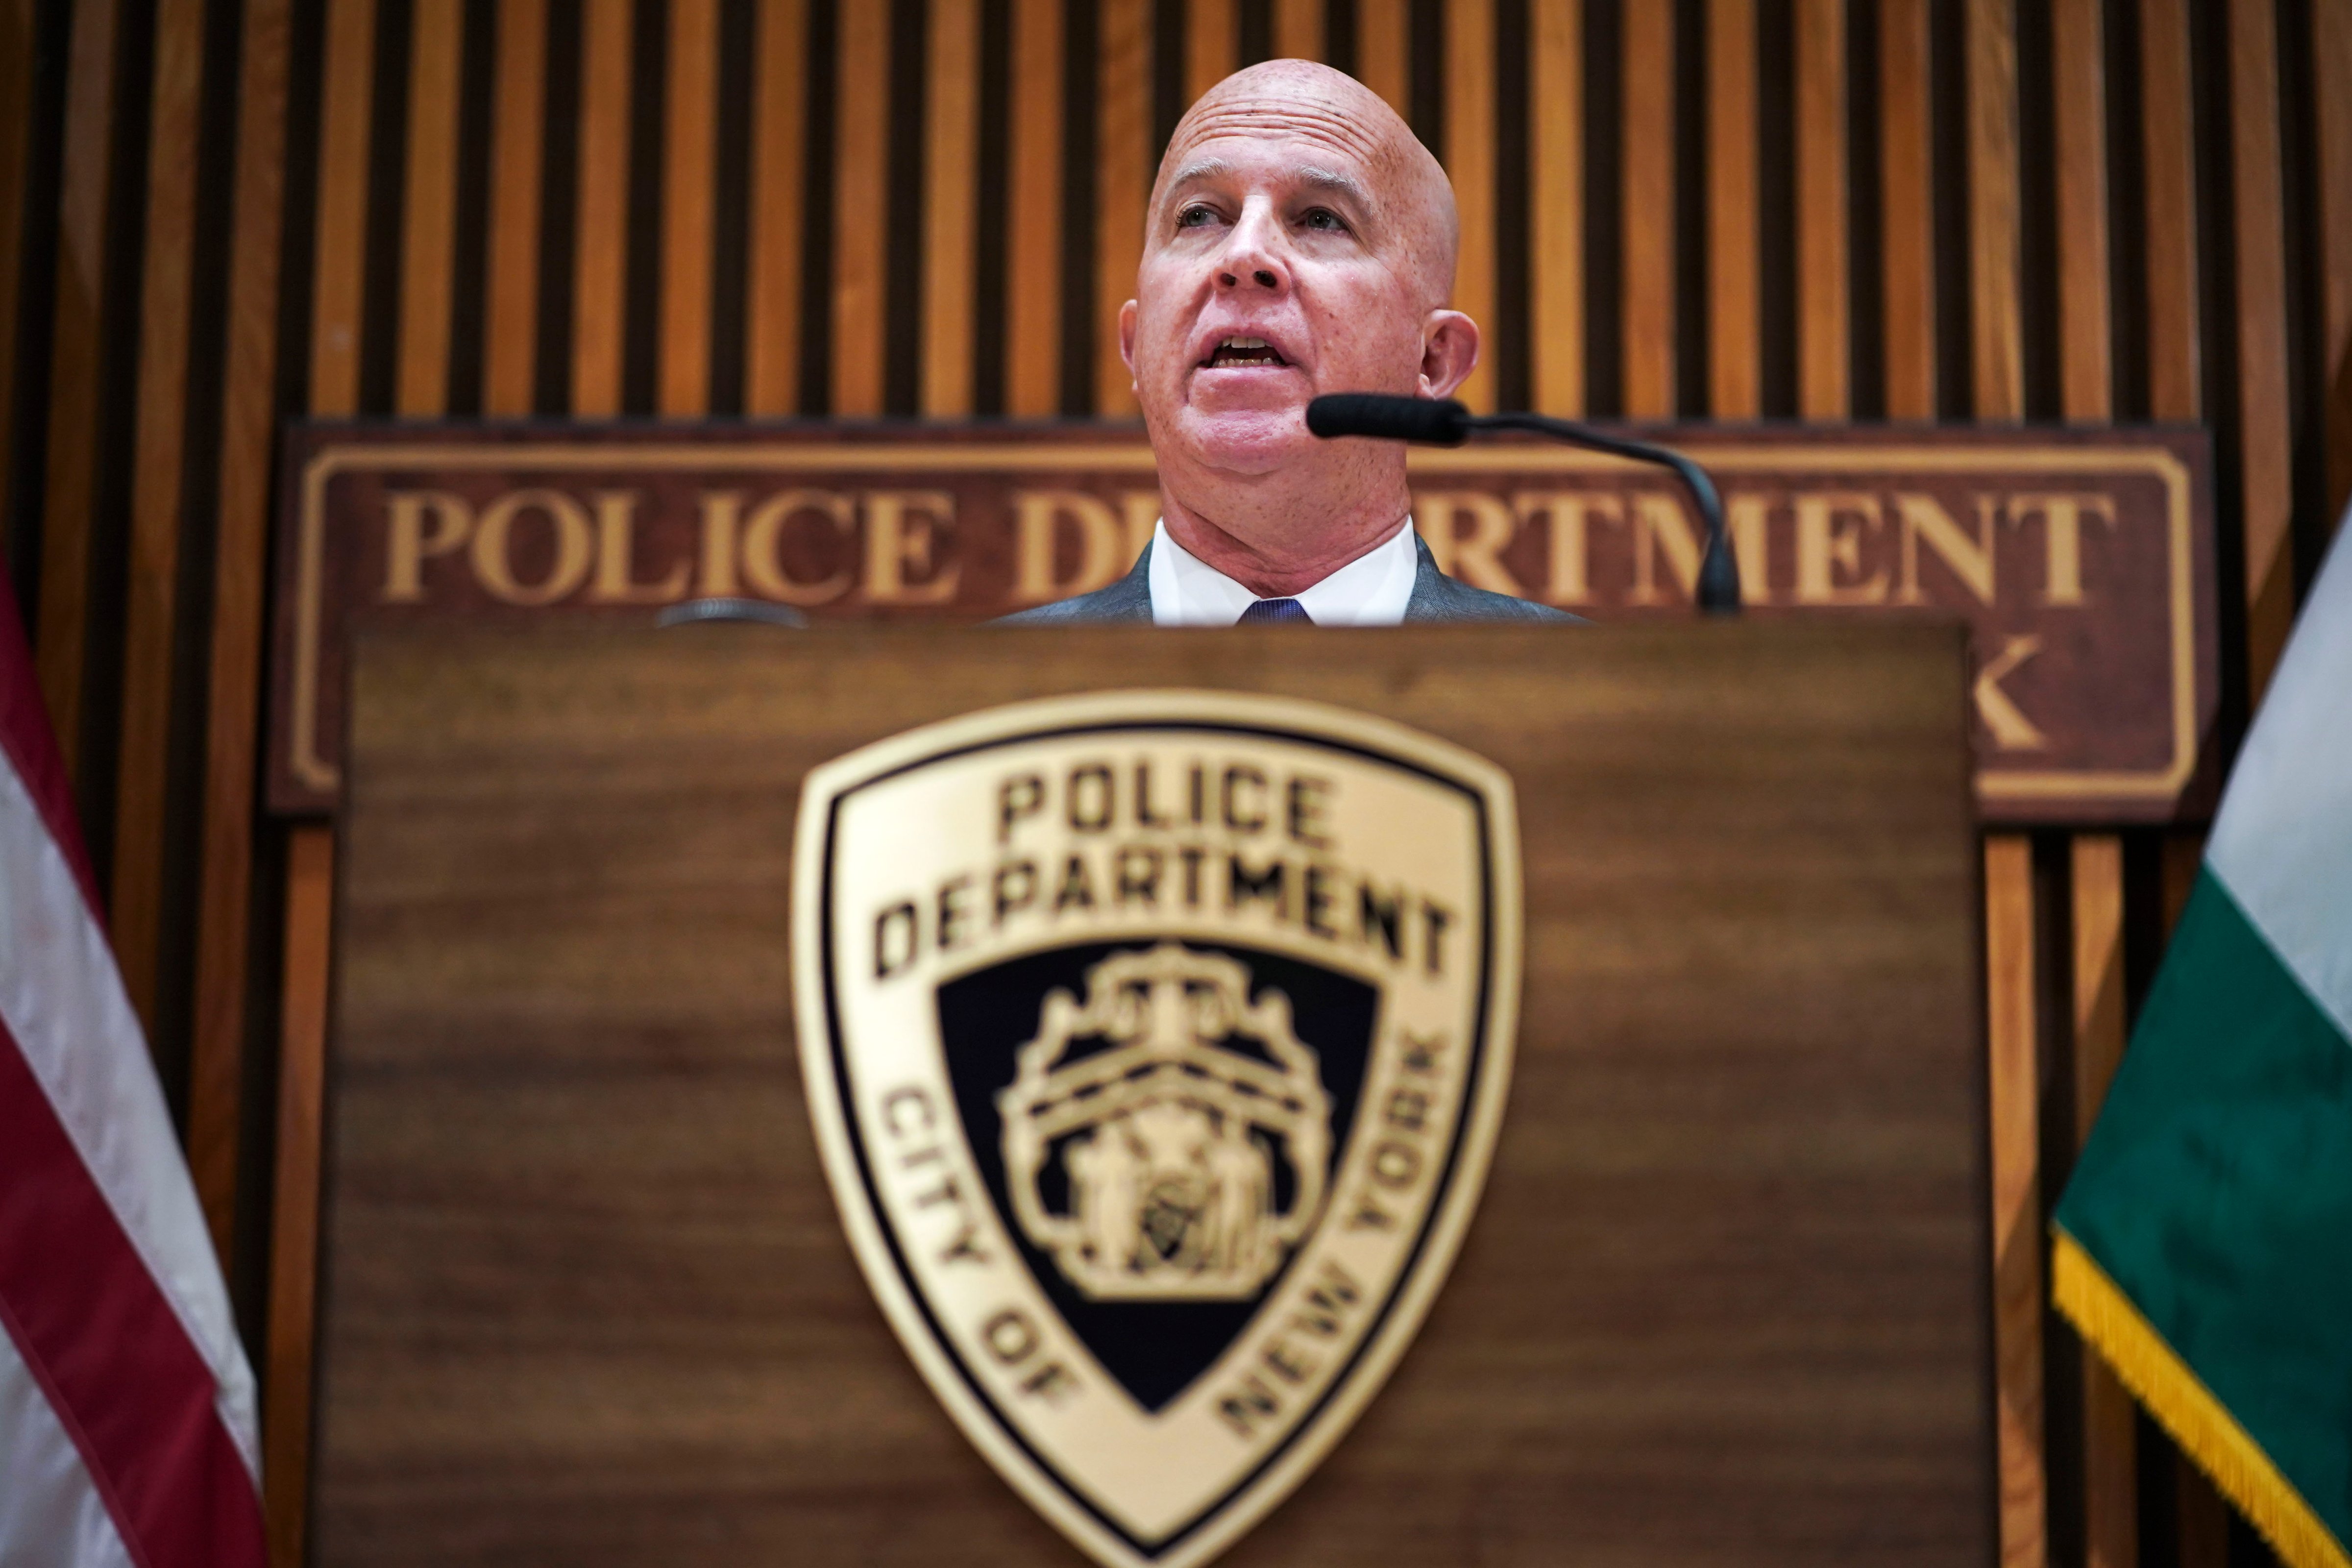 New York City Police Commissioner James O'Neill speaks during a press conference to announce the termination of officer Daniel Pantaleo on August 19, 2019 in New York City. (Drew Angerer&mdash;Getty Images)